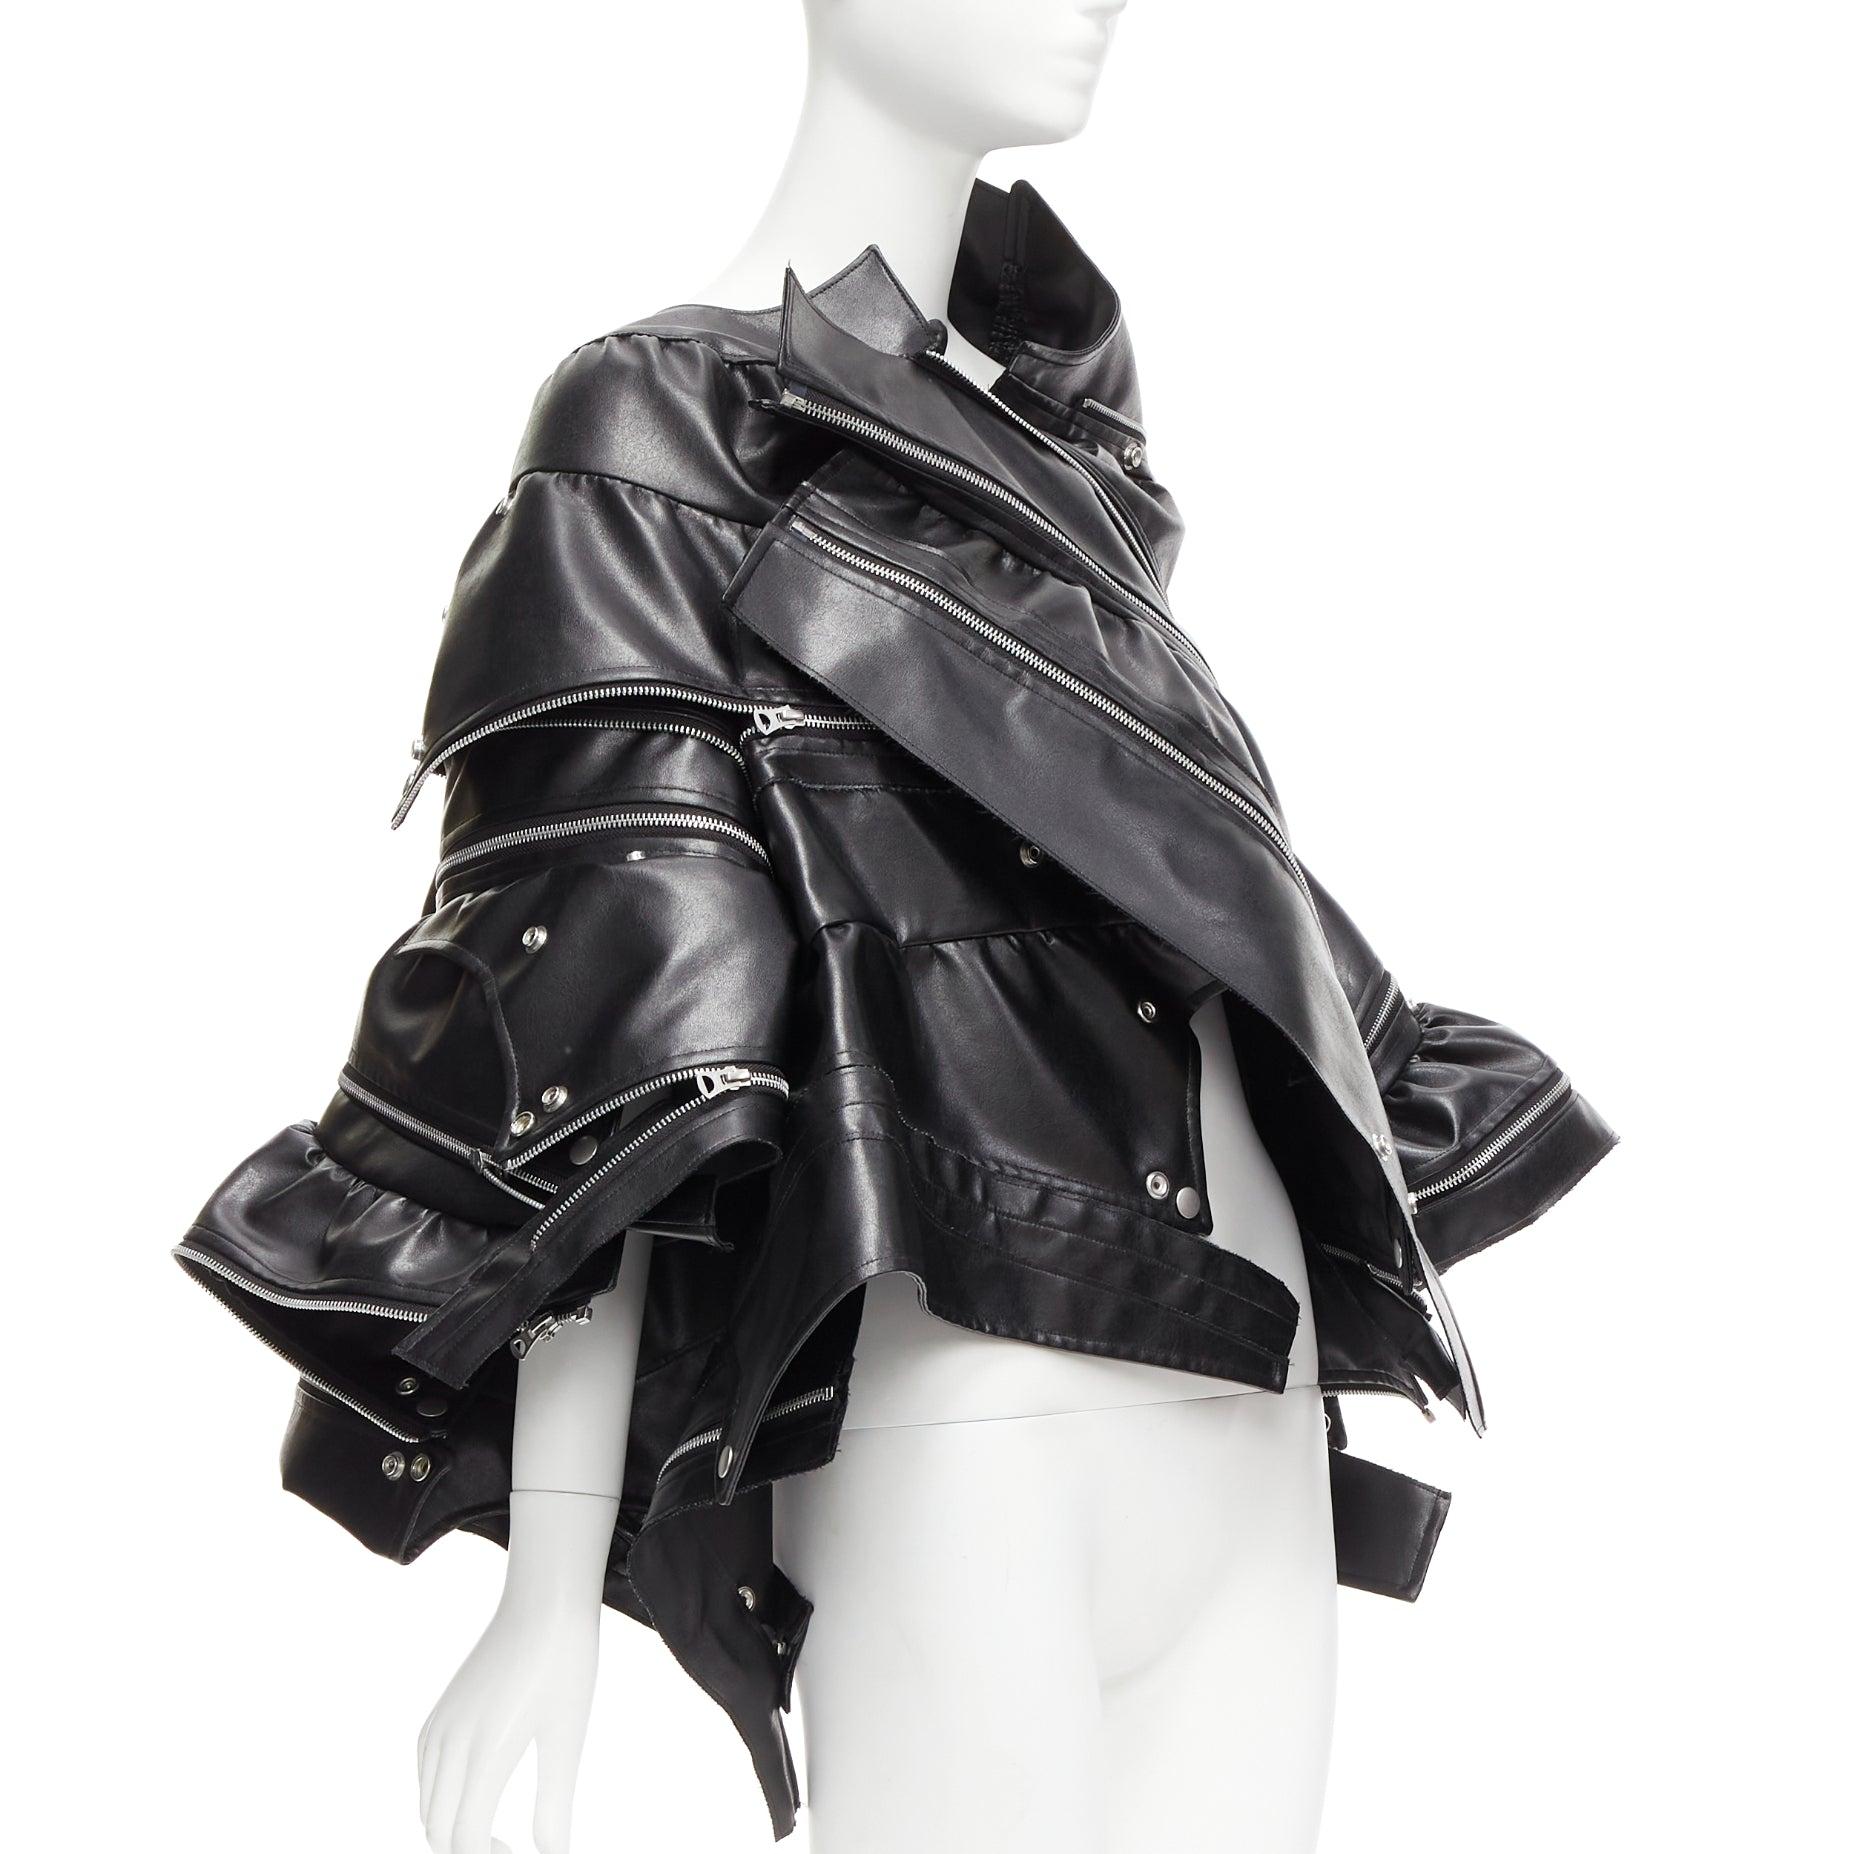 JUNYA WATANABE 2022 Runway black zip pleather deconstructed cape coat XS
Reference: AAWC/A00721
Brand: Junya Watanabe
Designer: Junya Watanabe
Collection: 2022 - Runway
Material: Faux Leather
Color: Black, Silver
Pattern: Solid
Closure: Snap